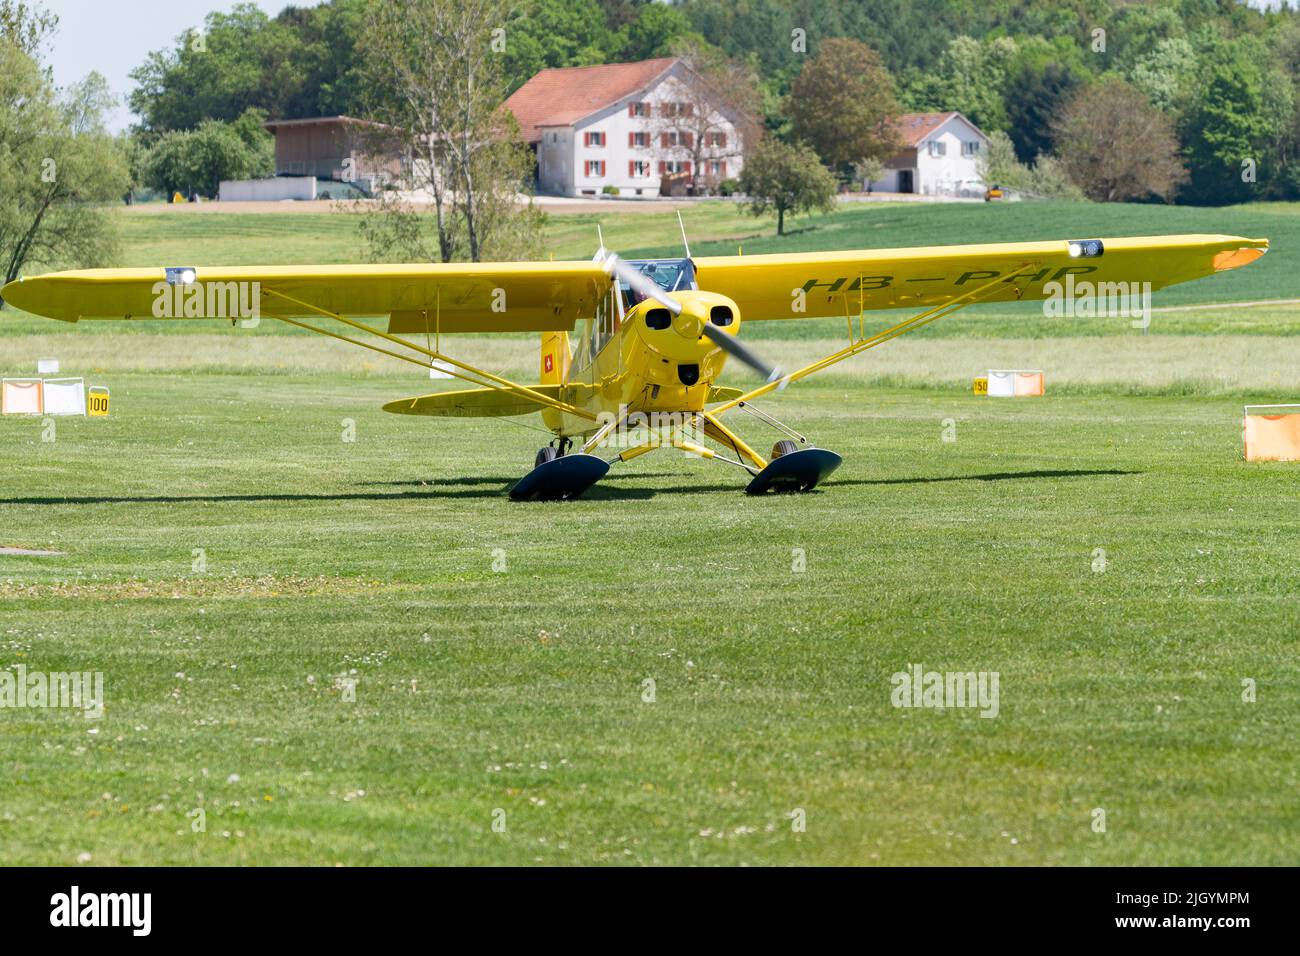 Lommis, Switzerland, May 11, 2022 Piper PA18-150 Super Cub propeller plane is taxiing on the grass on a small airfield, Stock Photo